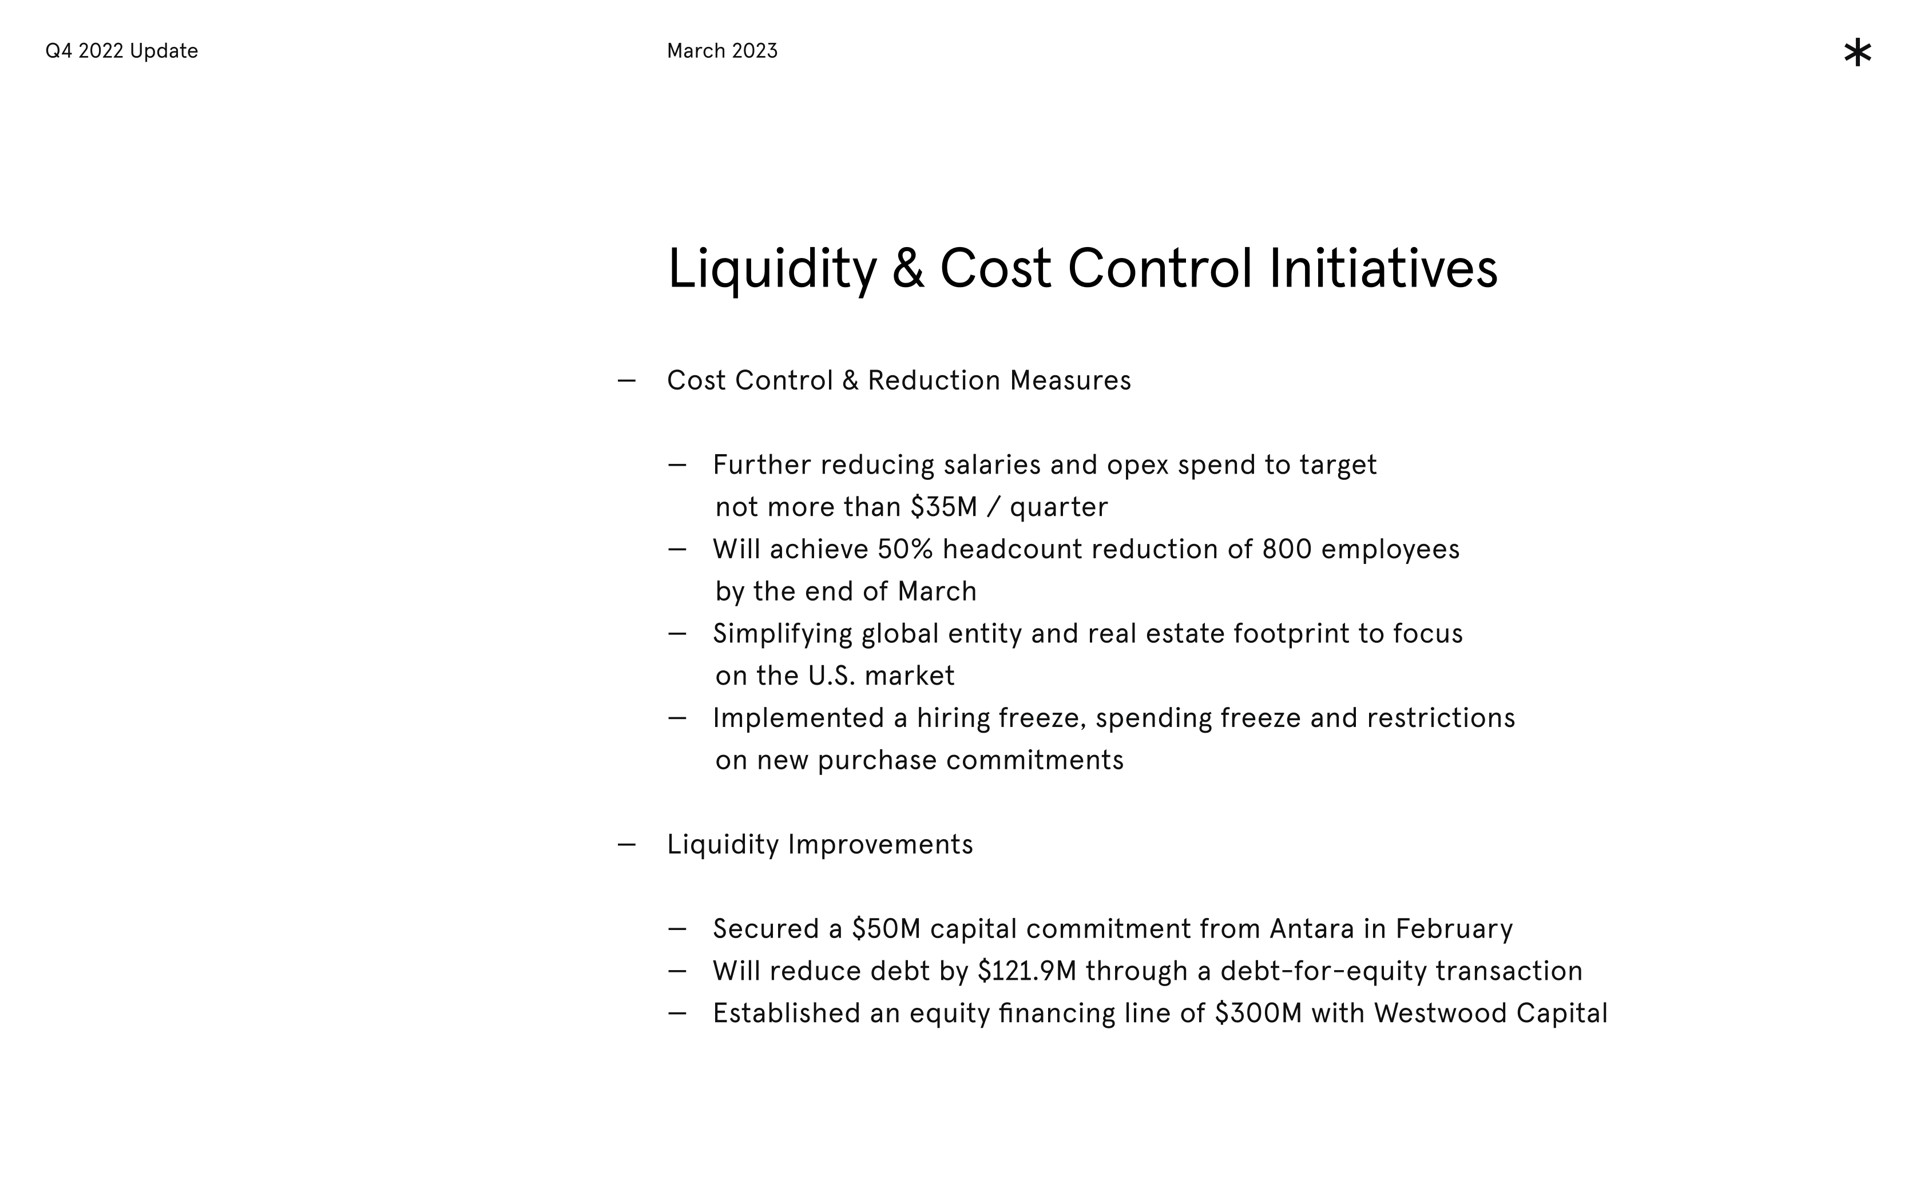 liquidity cost control cost control reduction measures further reducing salaries and spend to target not more than quarter ill achieve reduction employees the end marc entity and real estate to locus on the mar implemented a hiring spending and restrictions on purchase liquidity improvements a capital commitment in ill reduce through a equity an equity line capital update initiatives will of by of march simplifying global footprint focus market freeze freeze new commitments secured from will debt by debt for equity transaction established financing of with | Arrival